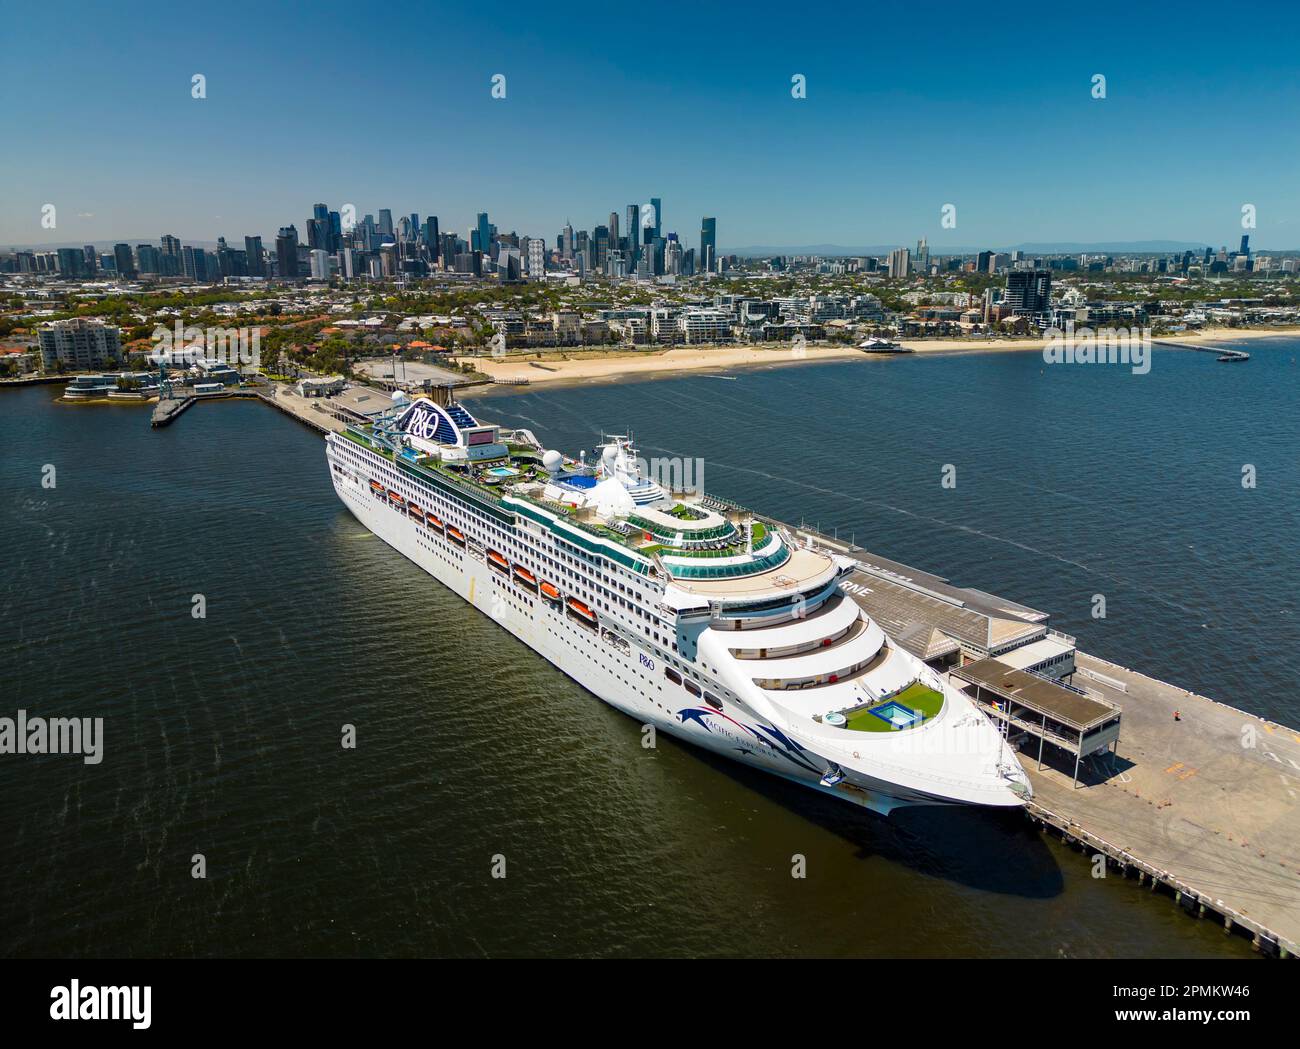 Melbourne, Australia - Dec 19, 2022: Aerial shot of cruise ship in Port Melbourne with city skyline in the background Stock Photo